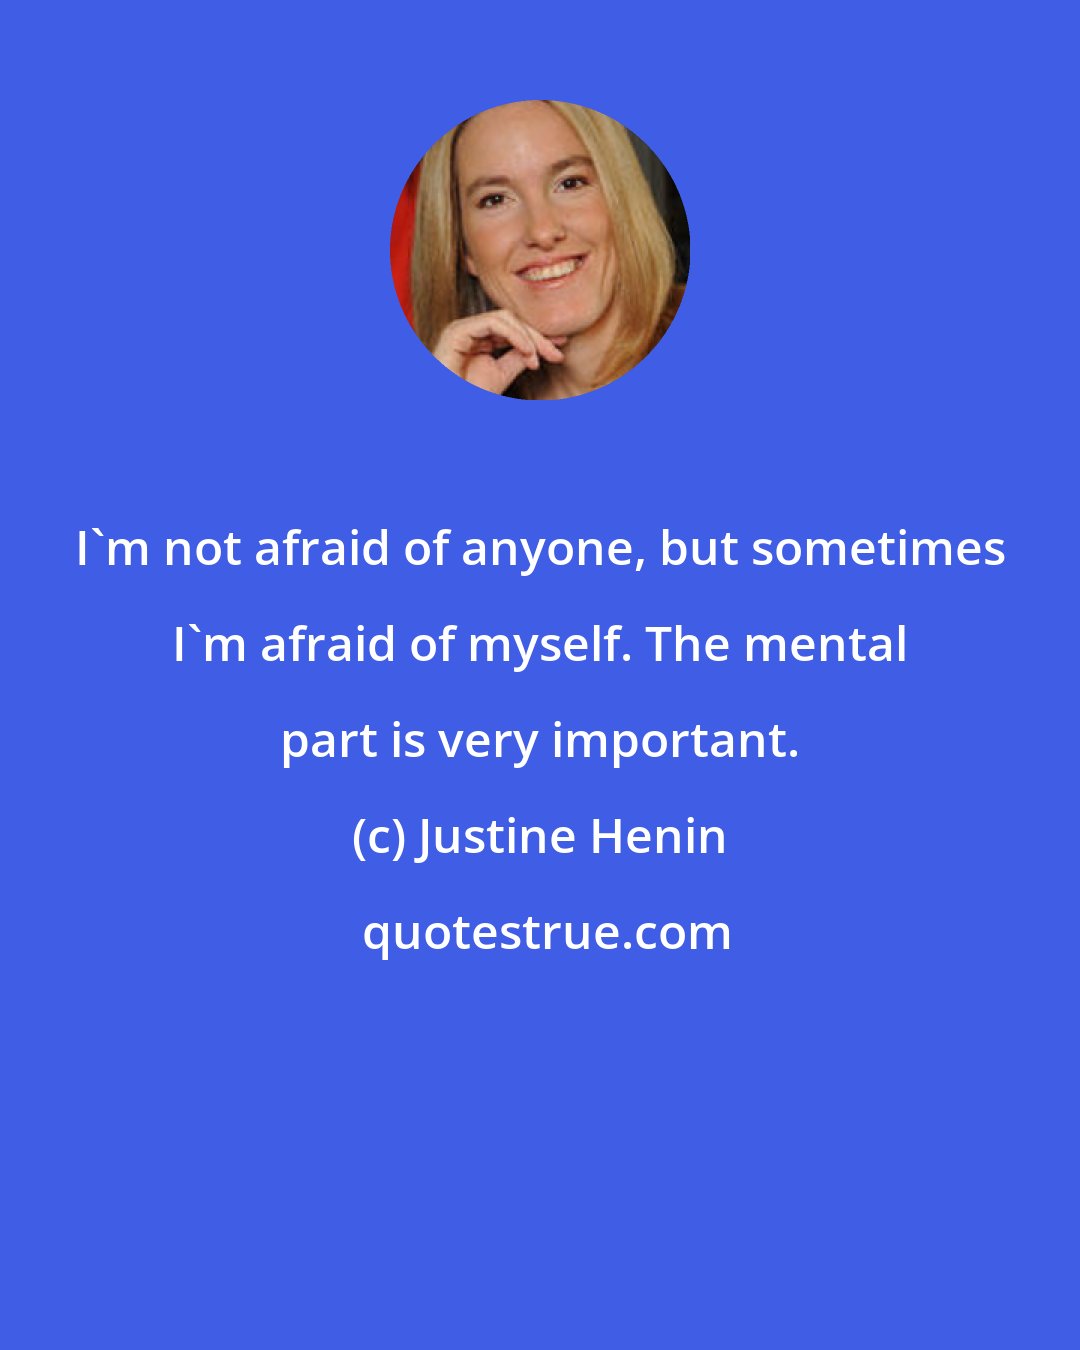 Justine Henin: I'm not afraid of anyone, but sometimes I'm afraid of myself. The mental part is very important.